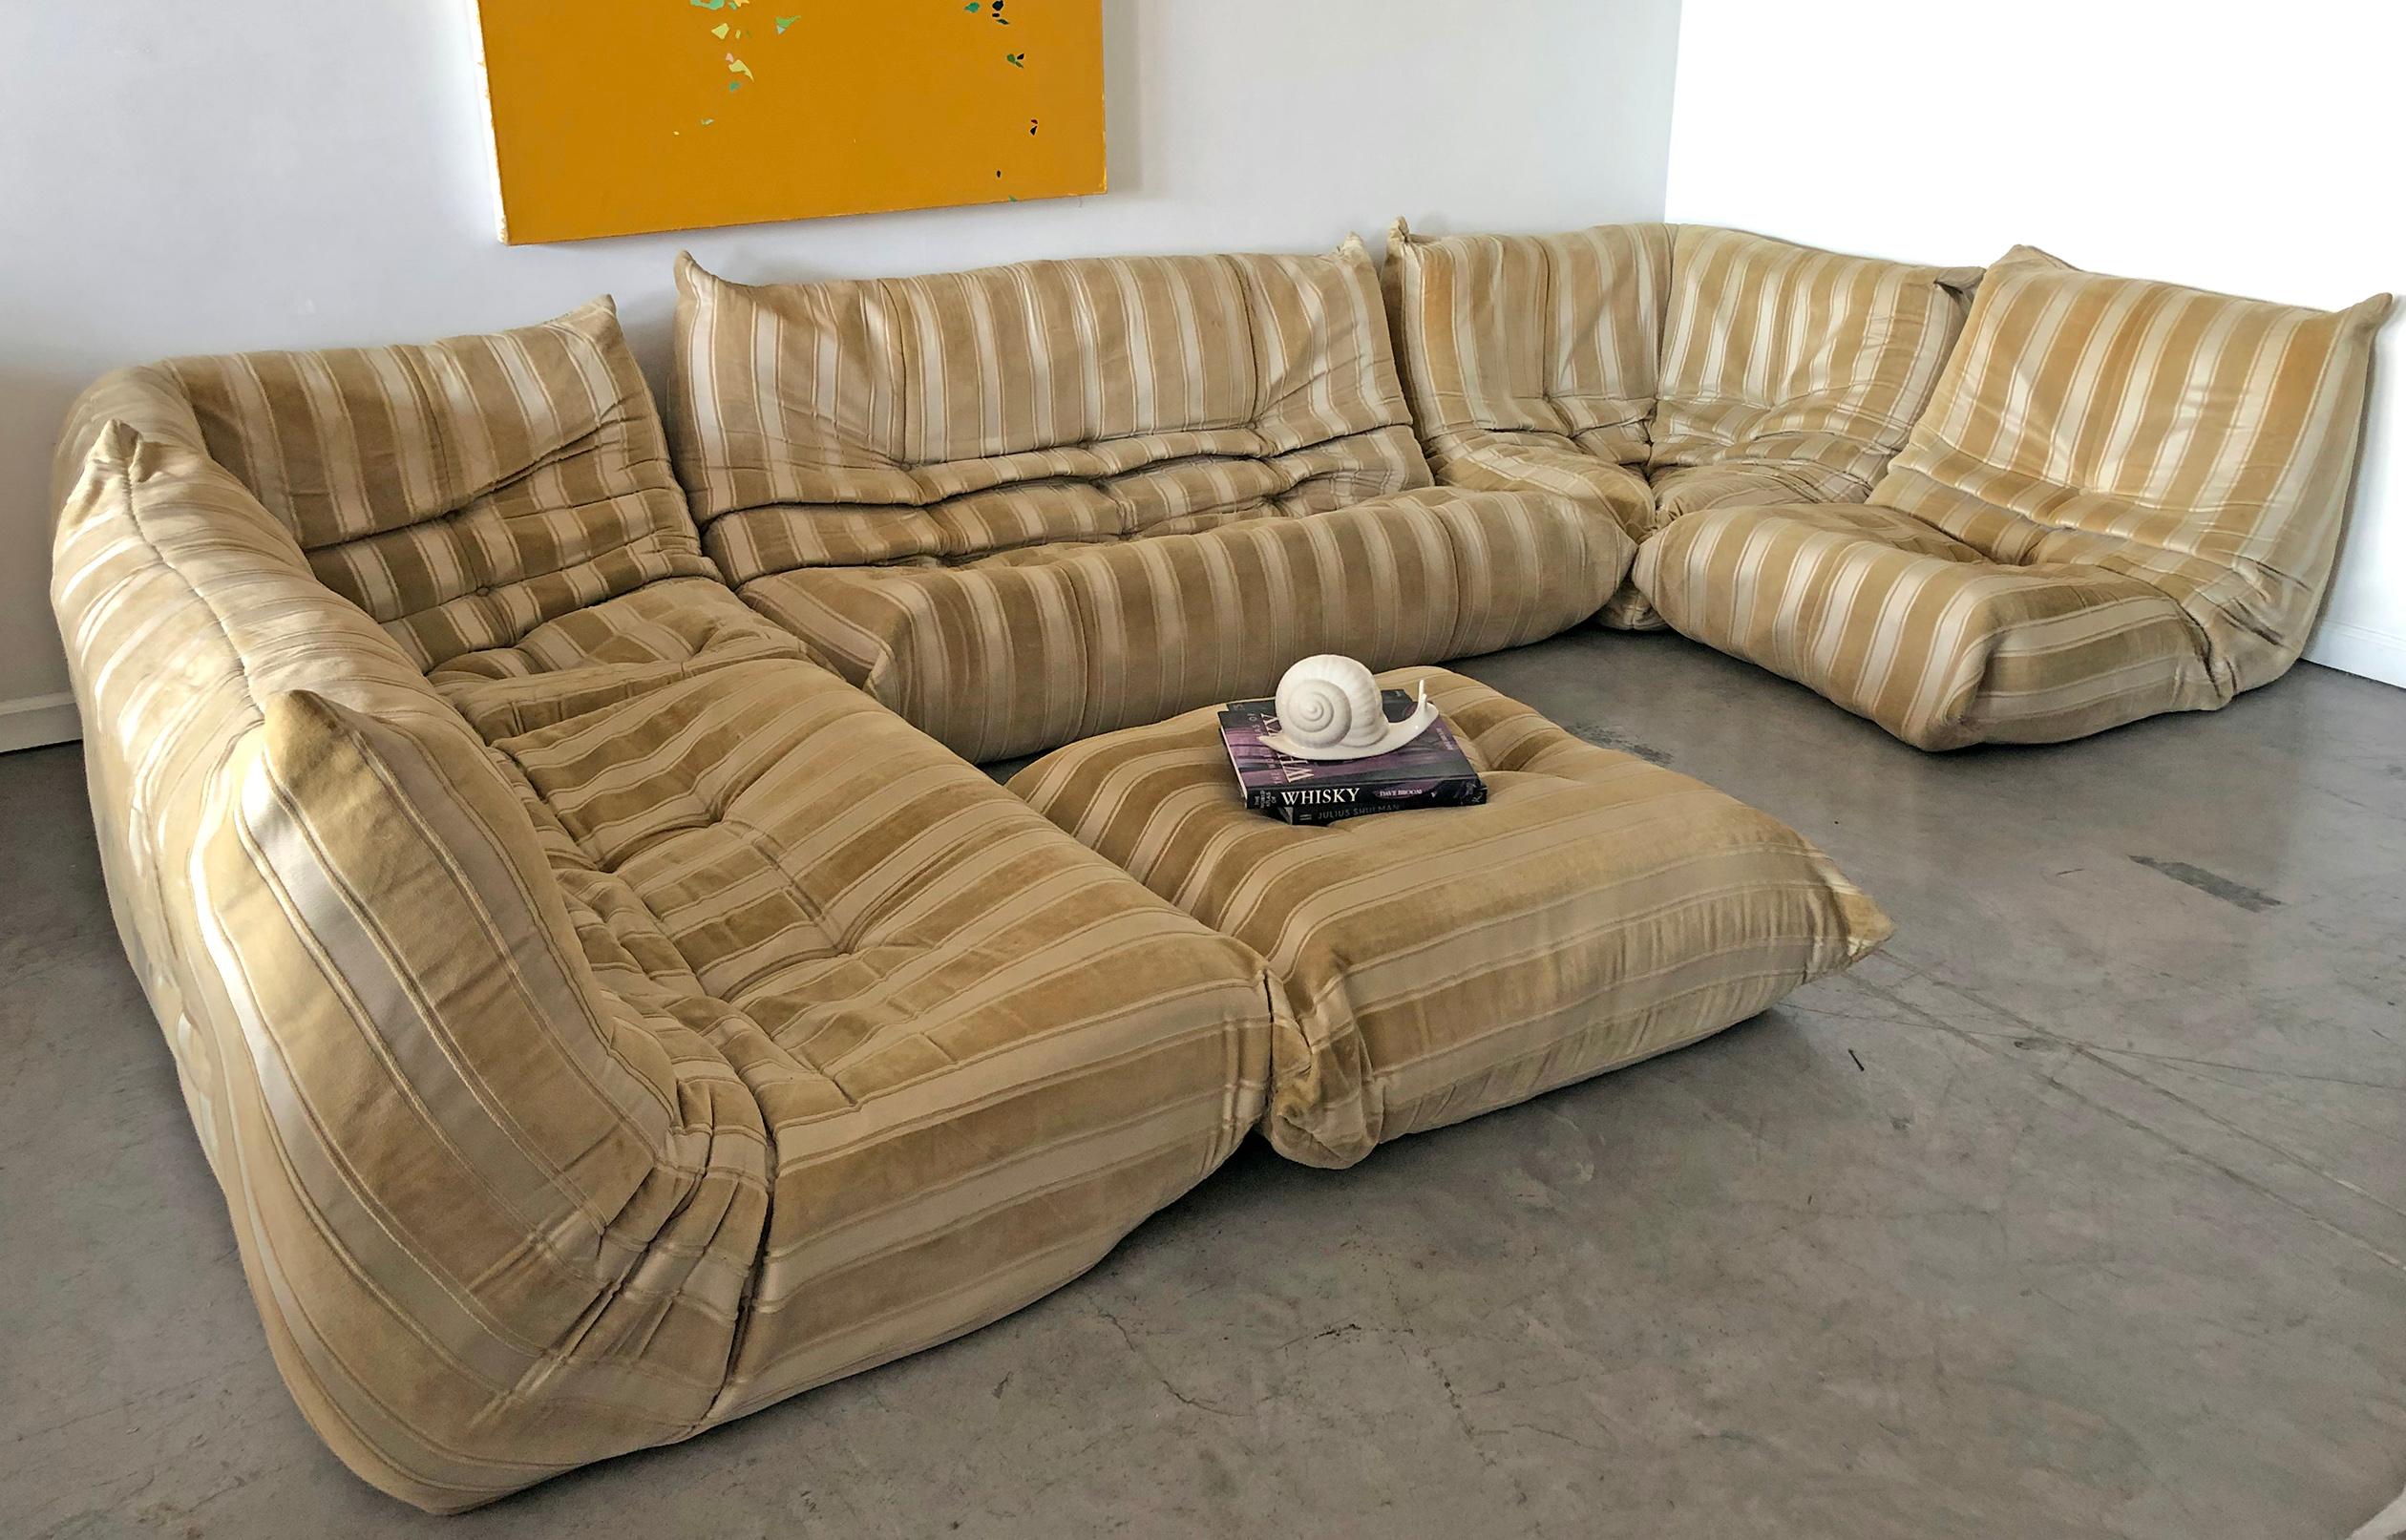 Available right now, we have an early original example of the modular sectional Togo sofa designed by Michael Ducaroy. This six-piece set is in good vintage condition with wear consistent with age and use. 
As configured: 147